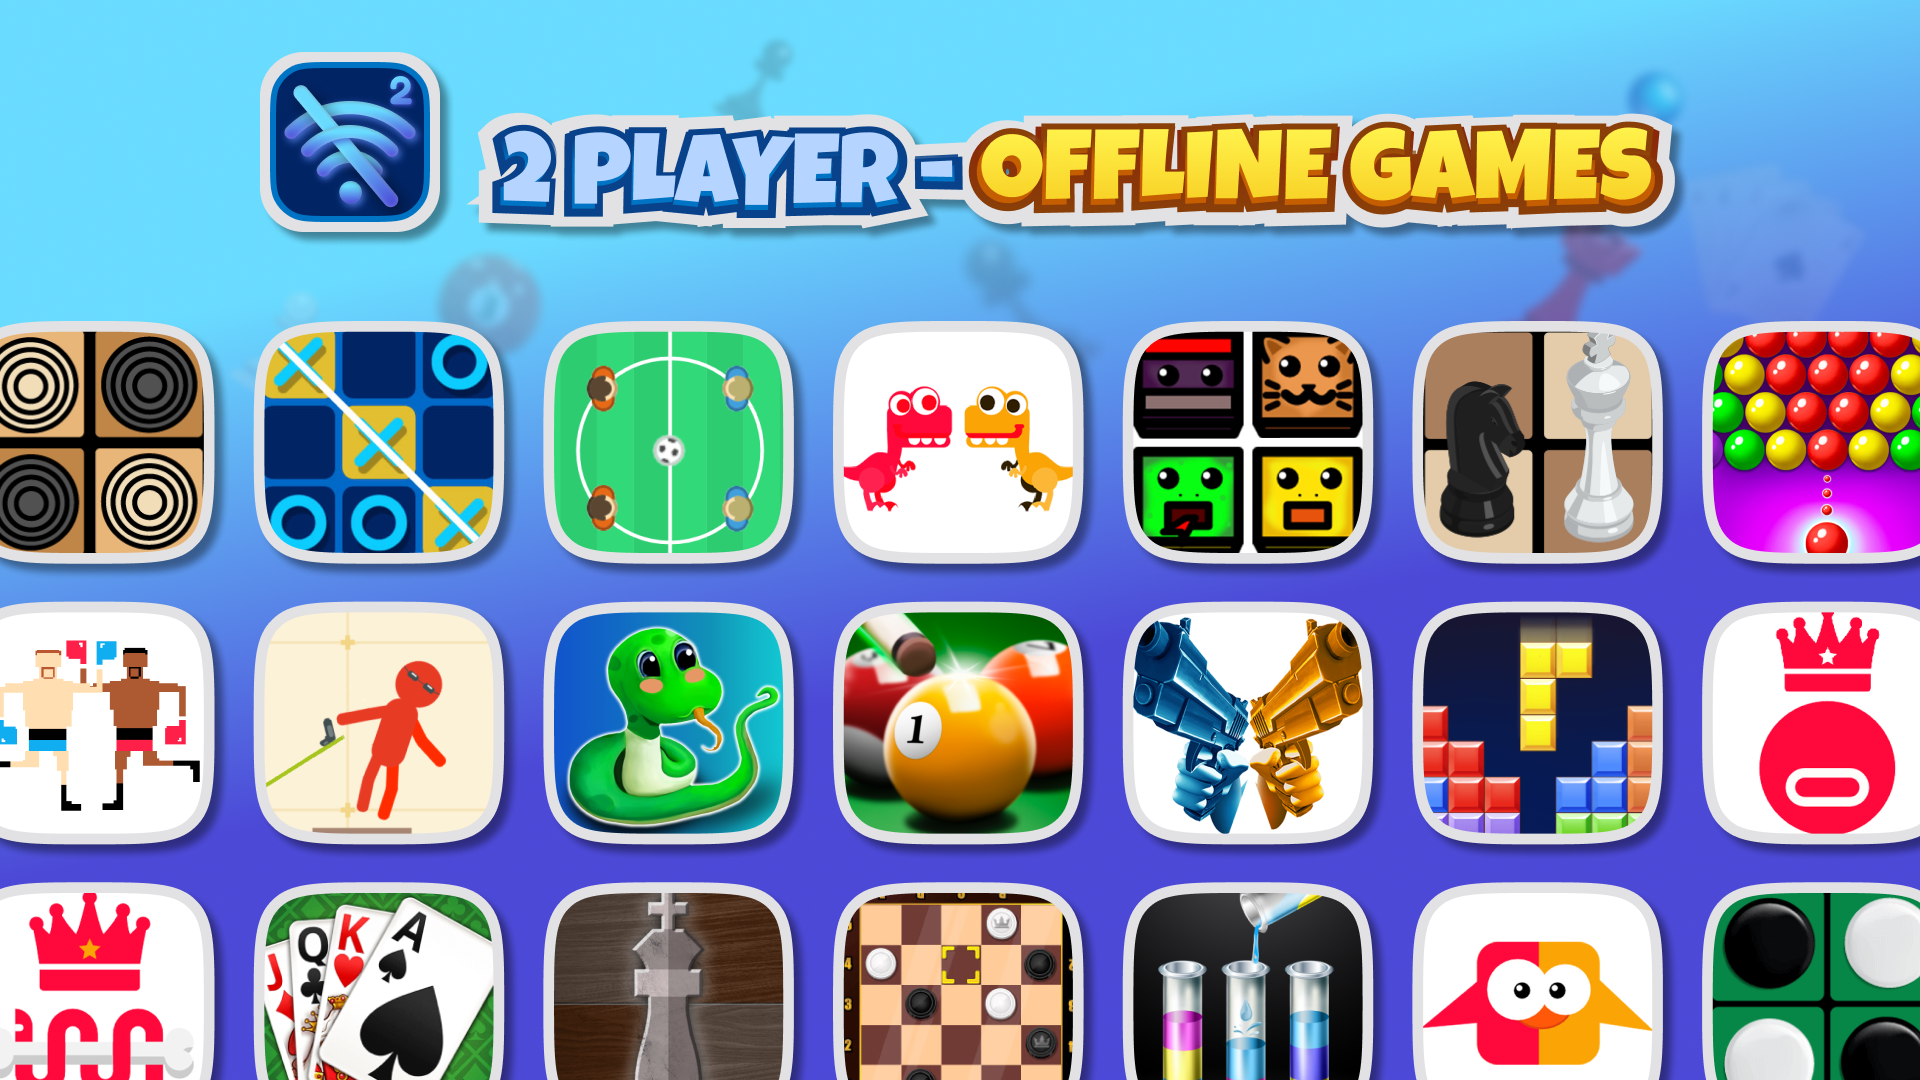 Play 2 Player Offline Games - Two Online